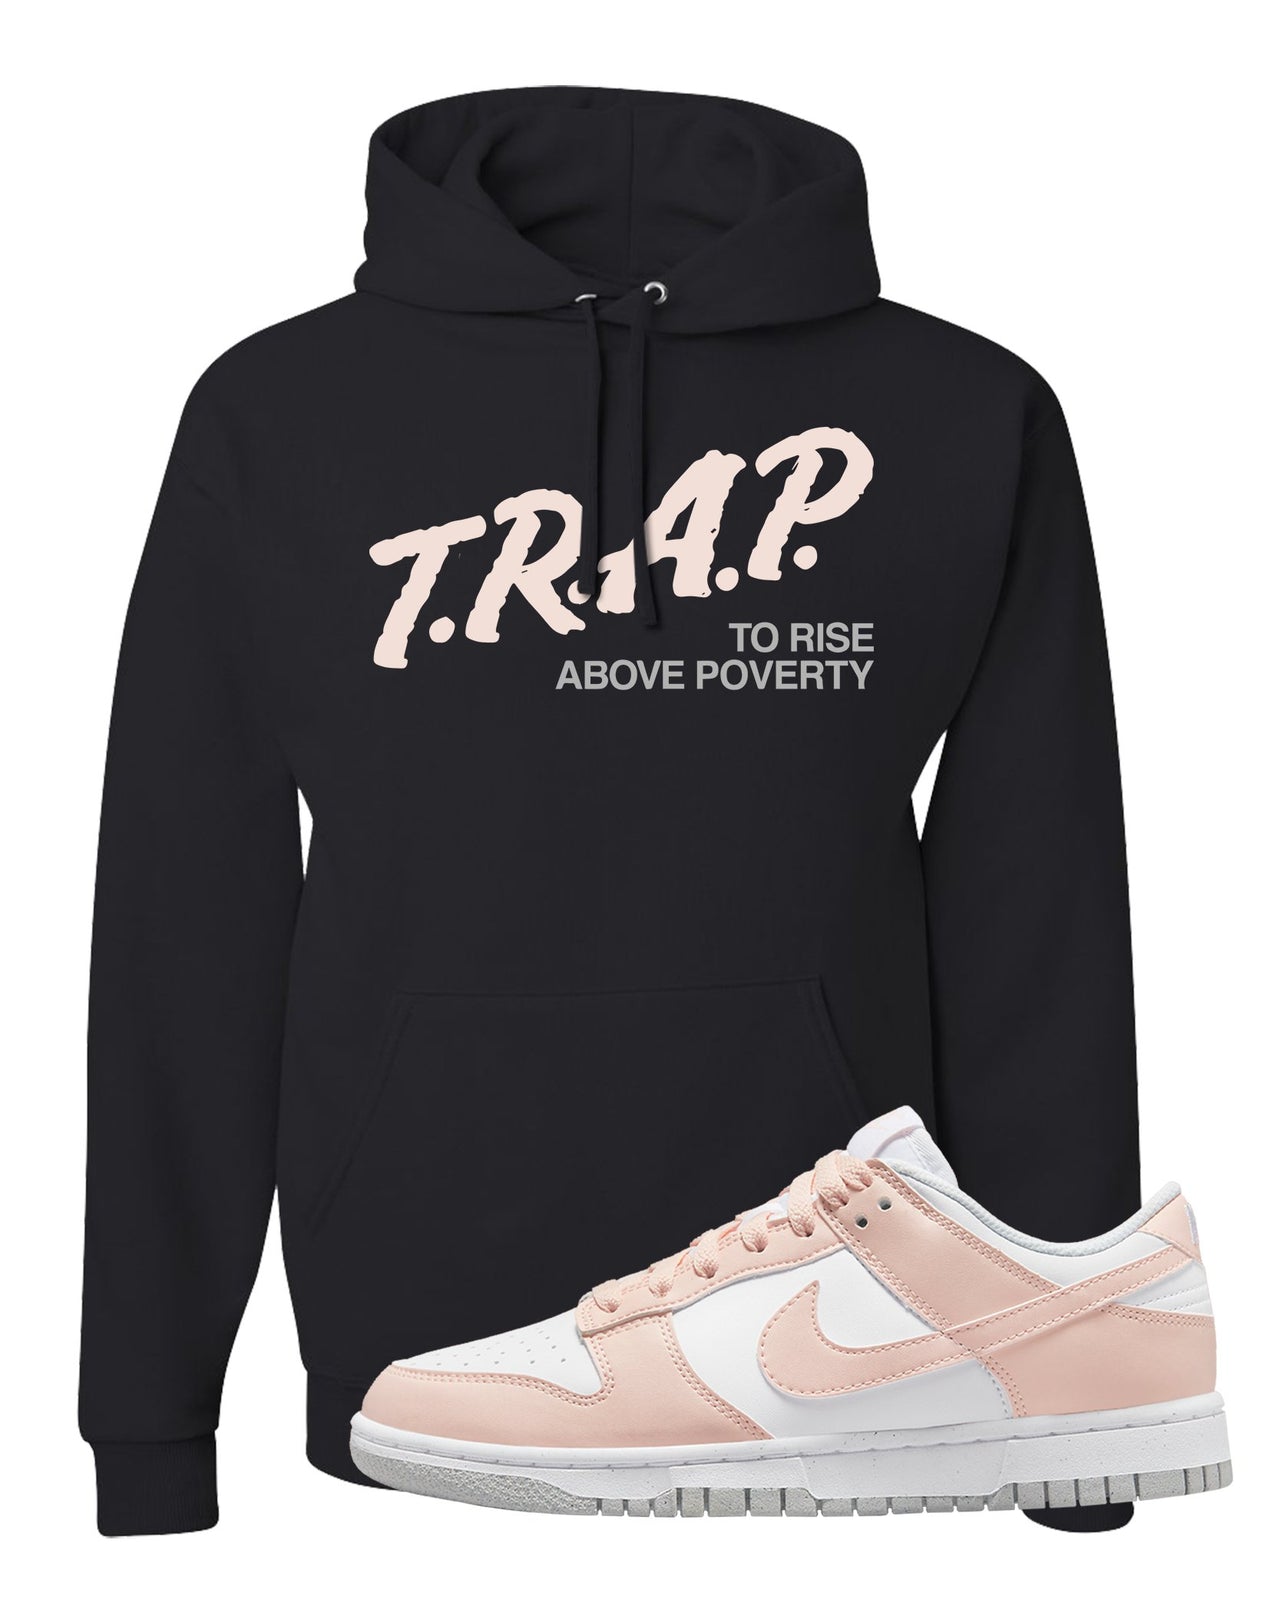 Next Nature Pale Citrus Low Dunks Hoodie | Trap To Rise Above Poverty, Black